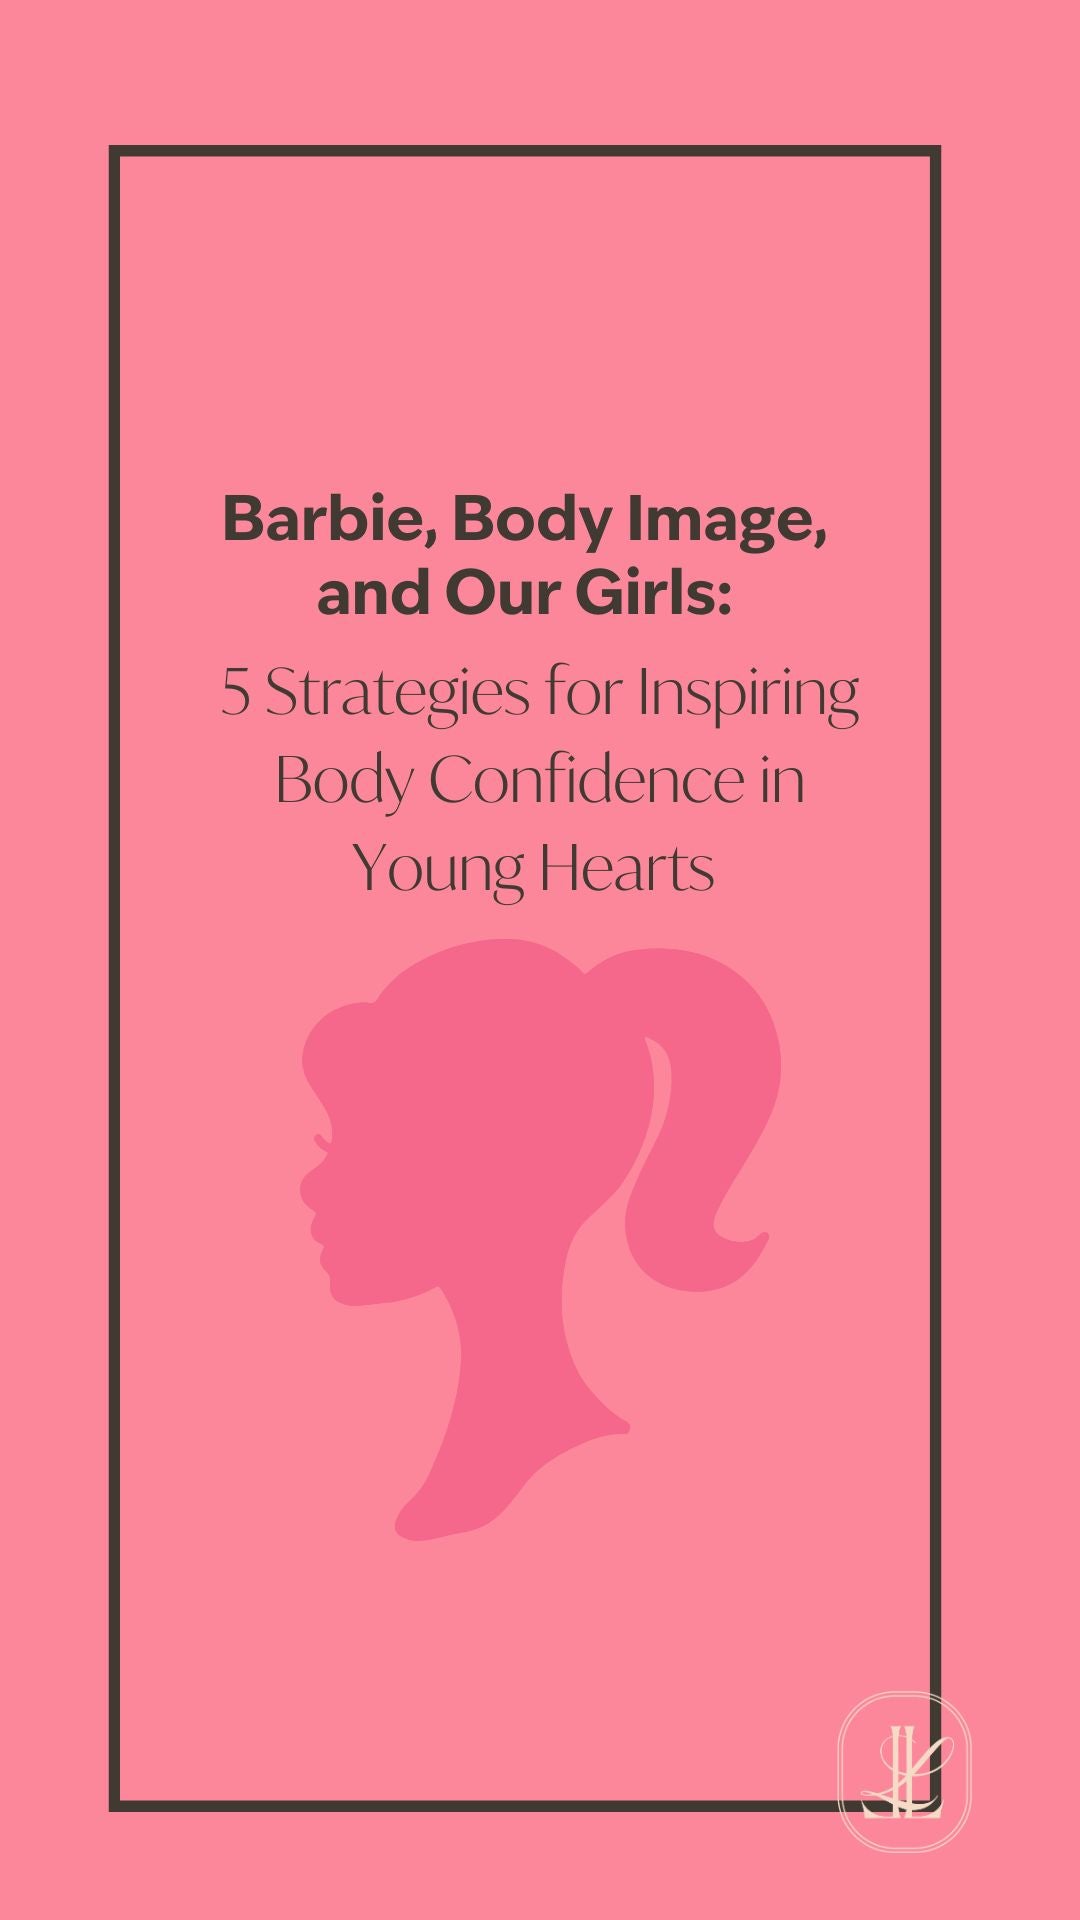 Barbie, Body Image, and Our Girls: 5 Strategies for Inspiring Body Confidence in Young Hearts